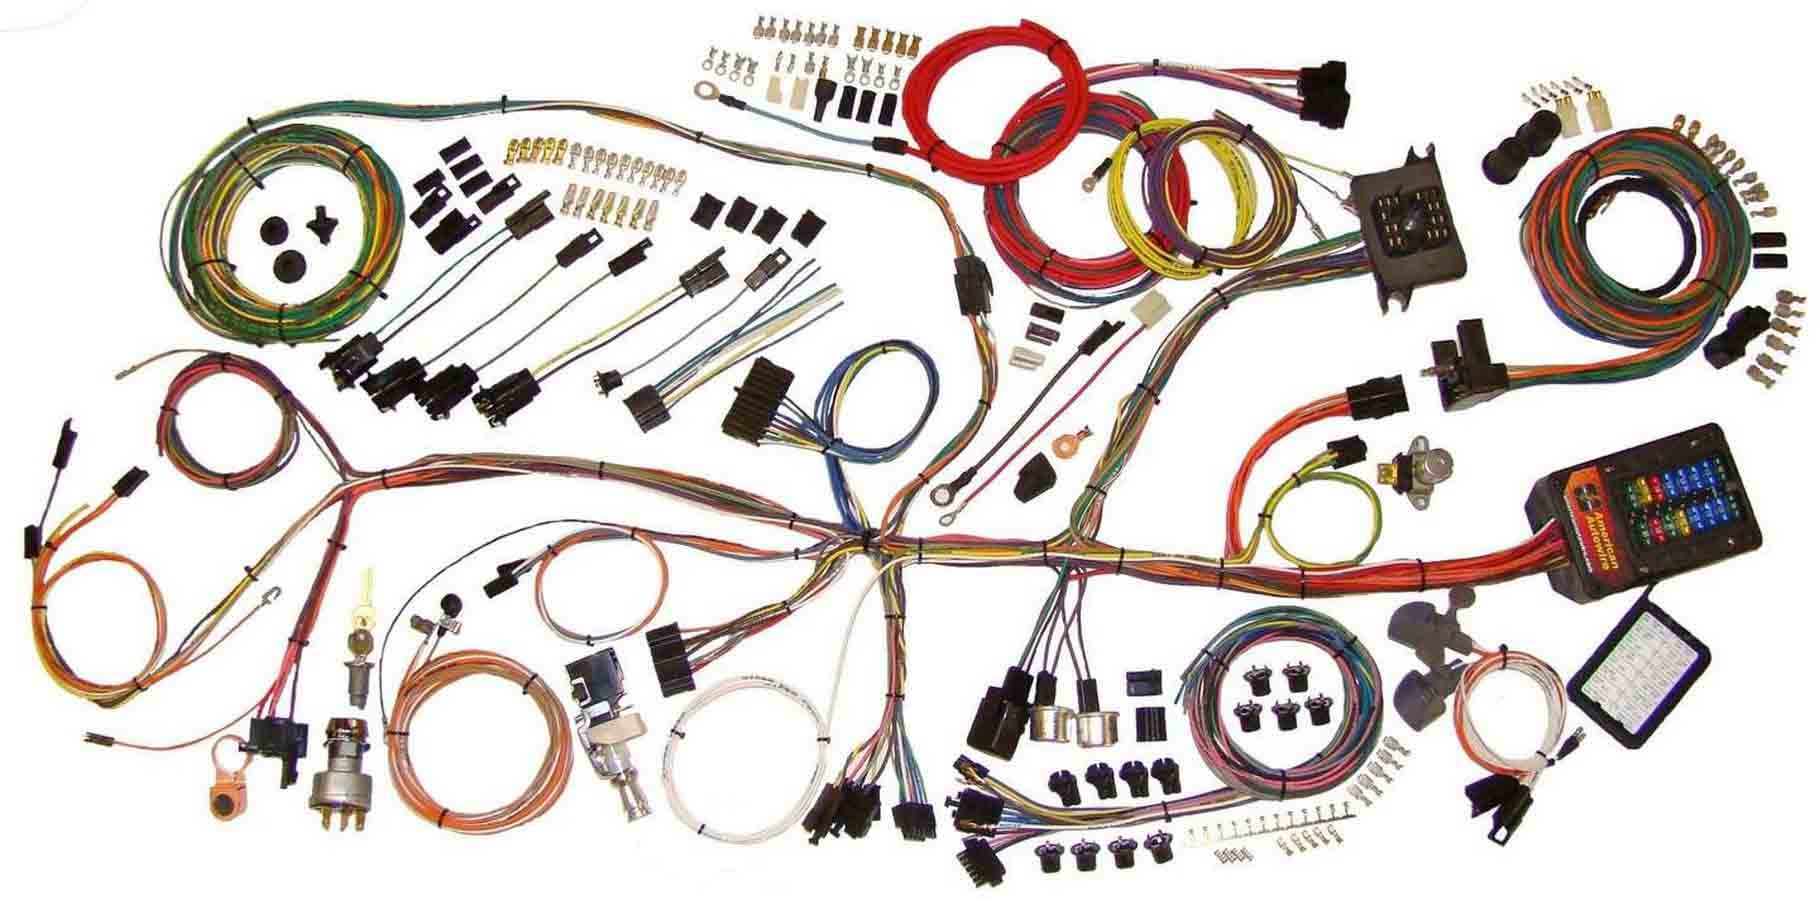 Painless Wiring 10406 Car Wiring Harness, Pro Series Truck, chevy truck wiring harness quick links american autowire 